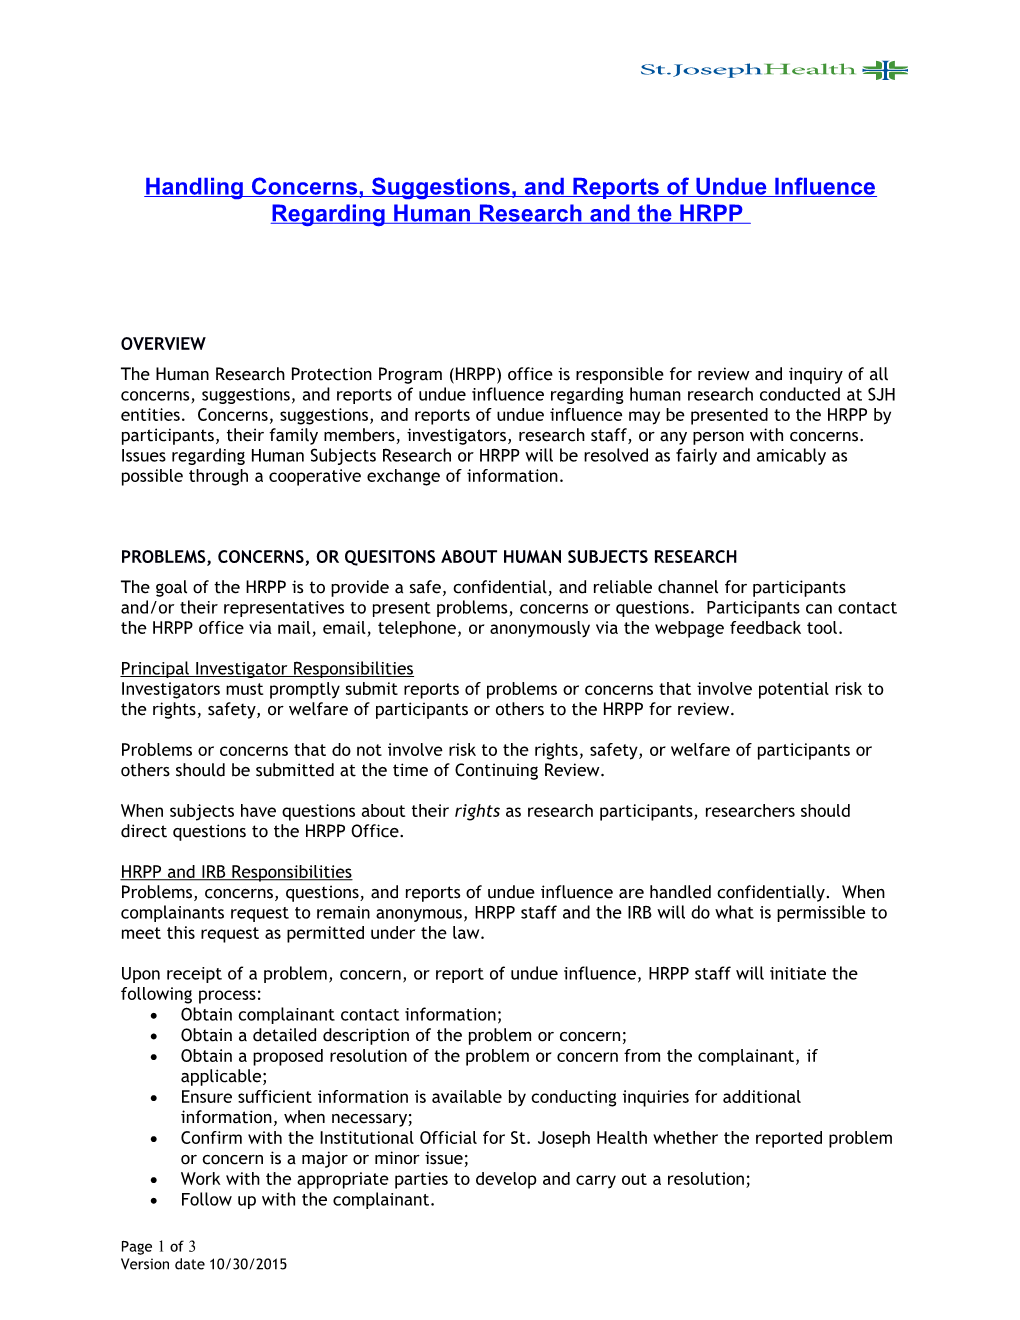 Handling Concerns, Suggestions, and Reports of Undue Influenceregarding Human Research